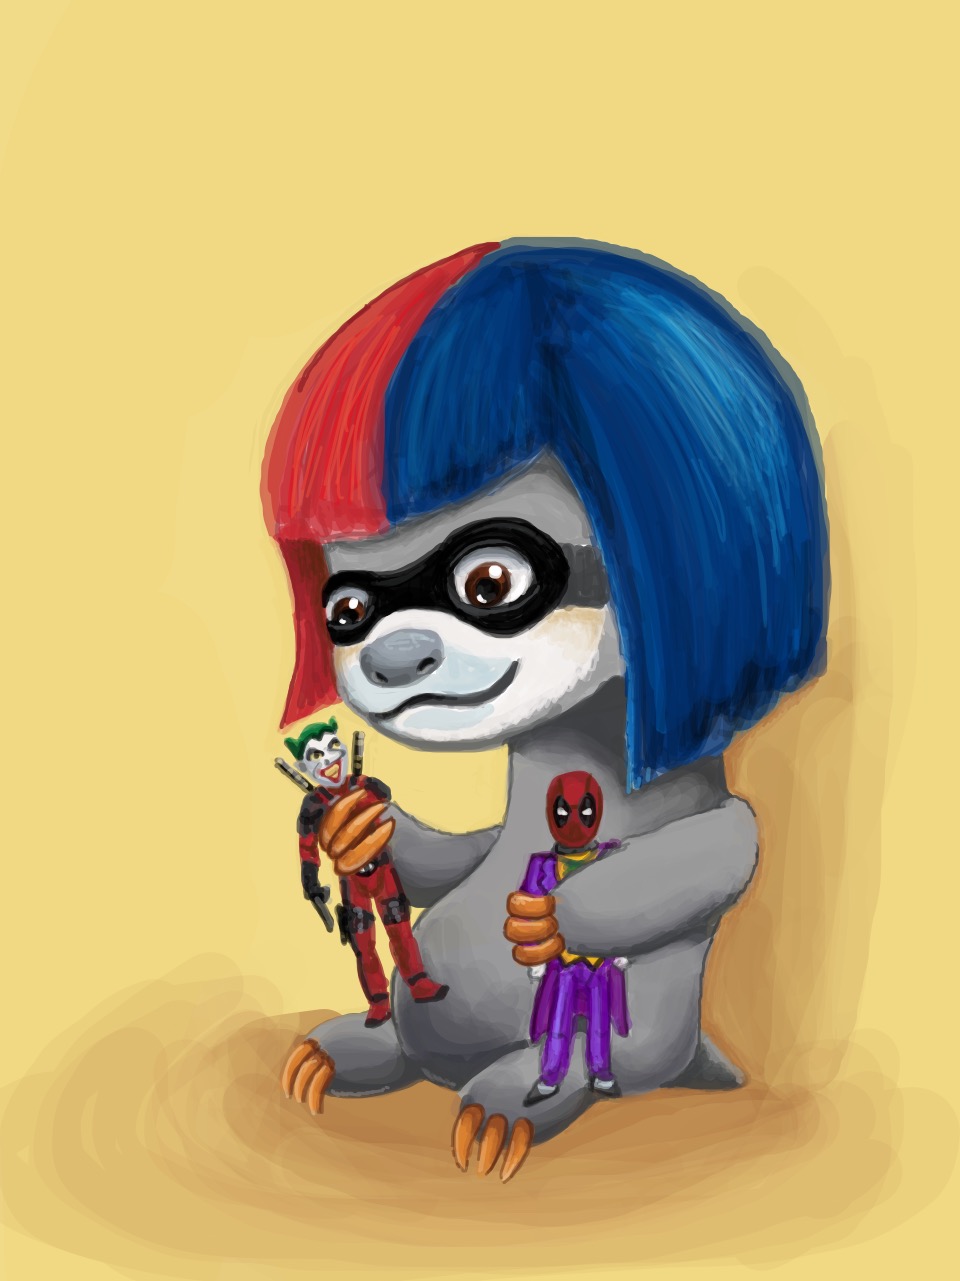 A chibi-style sloth, wearing a split in the middle red and blue wig and an opera mask, holding action figures of Deadpool and the Joker with their heads exchanged.